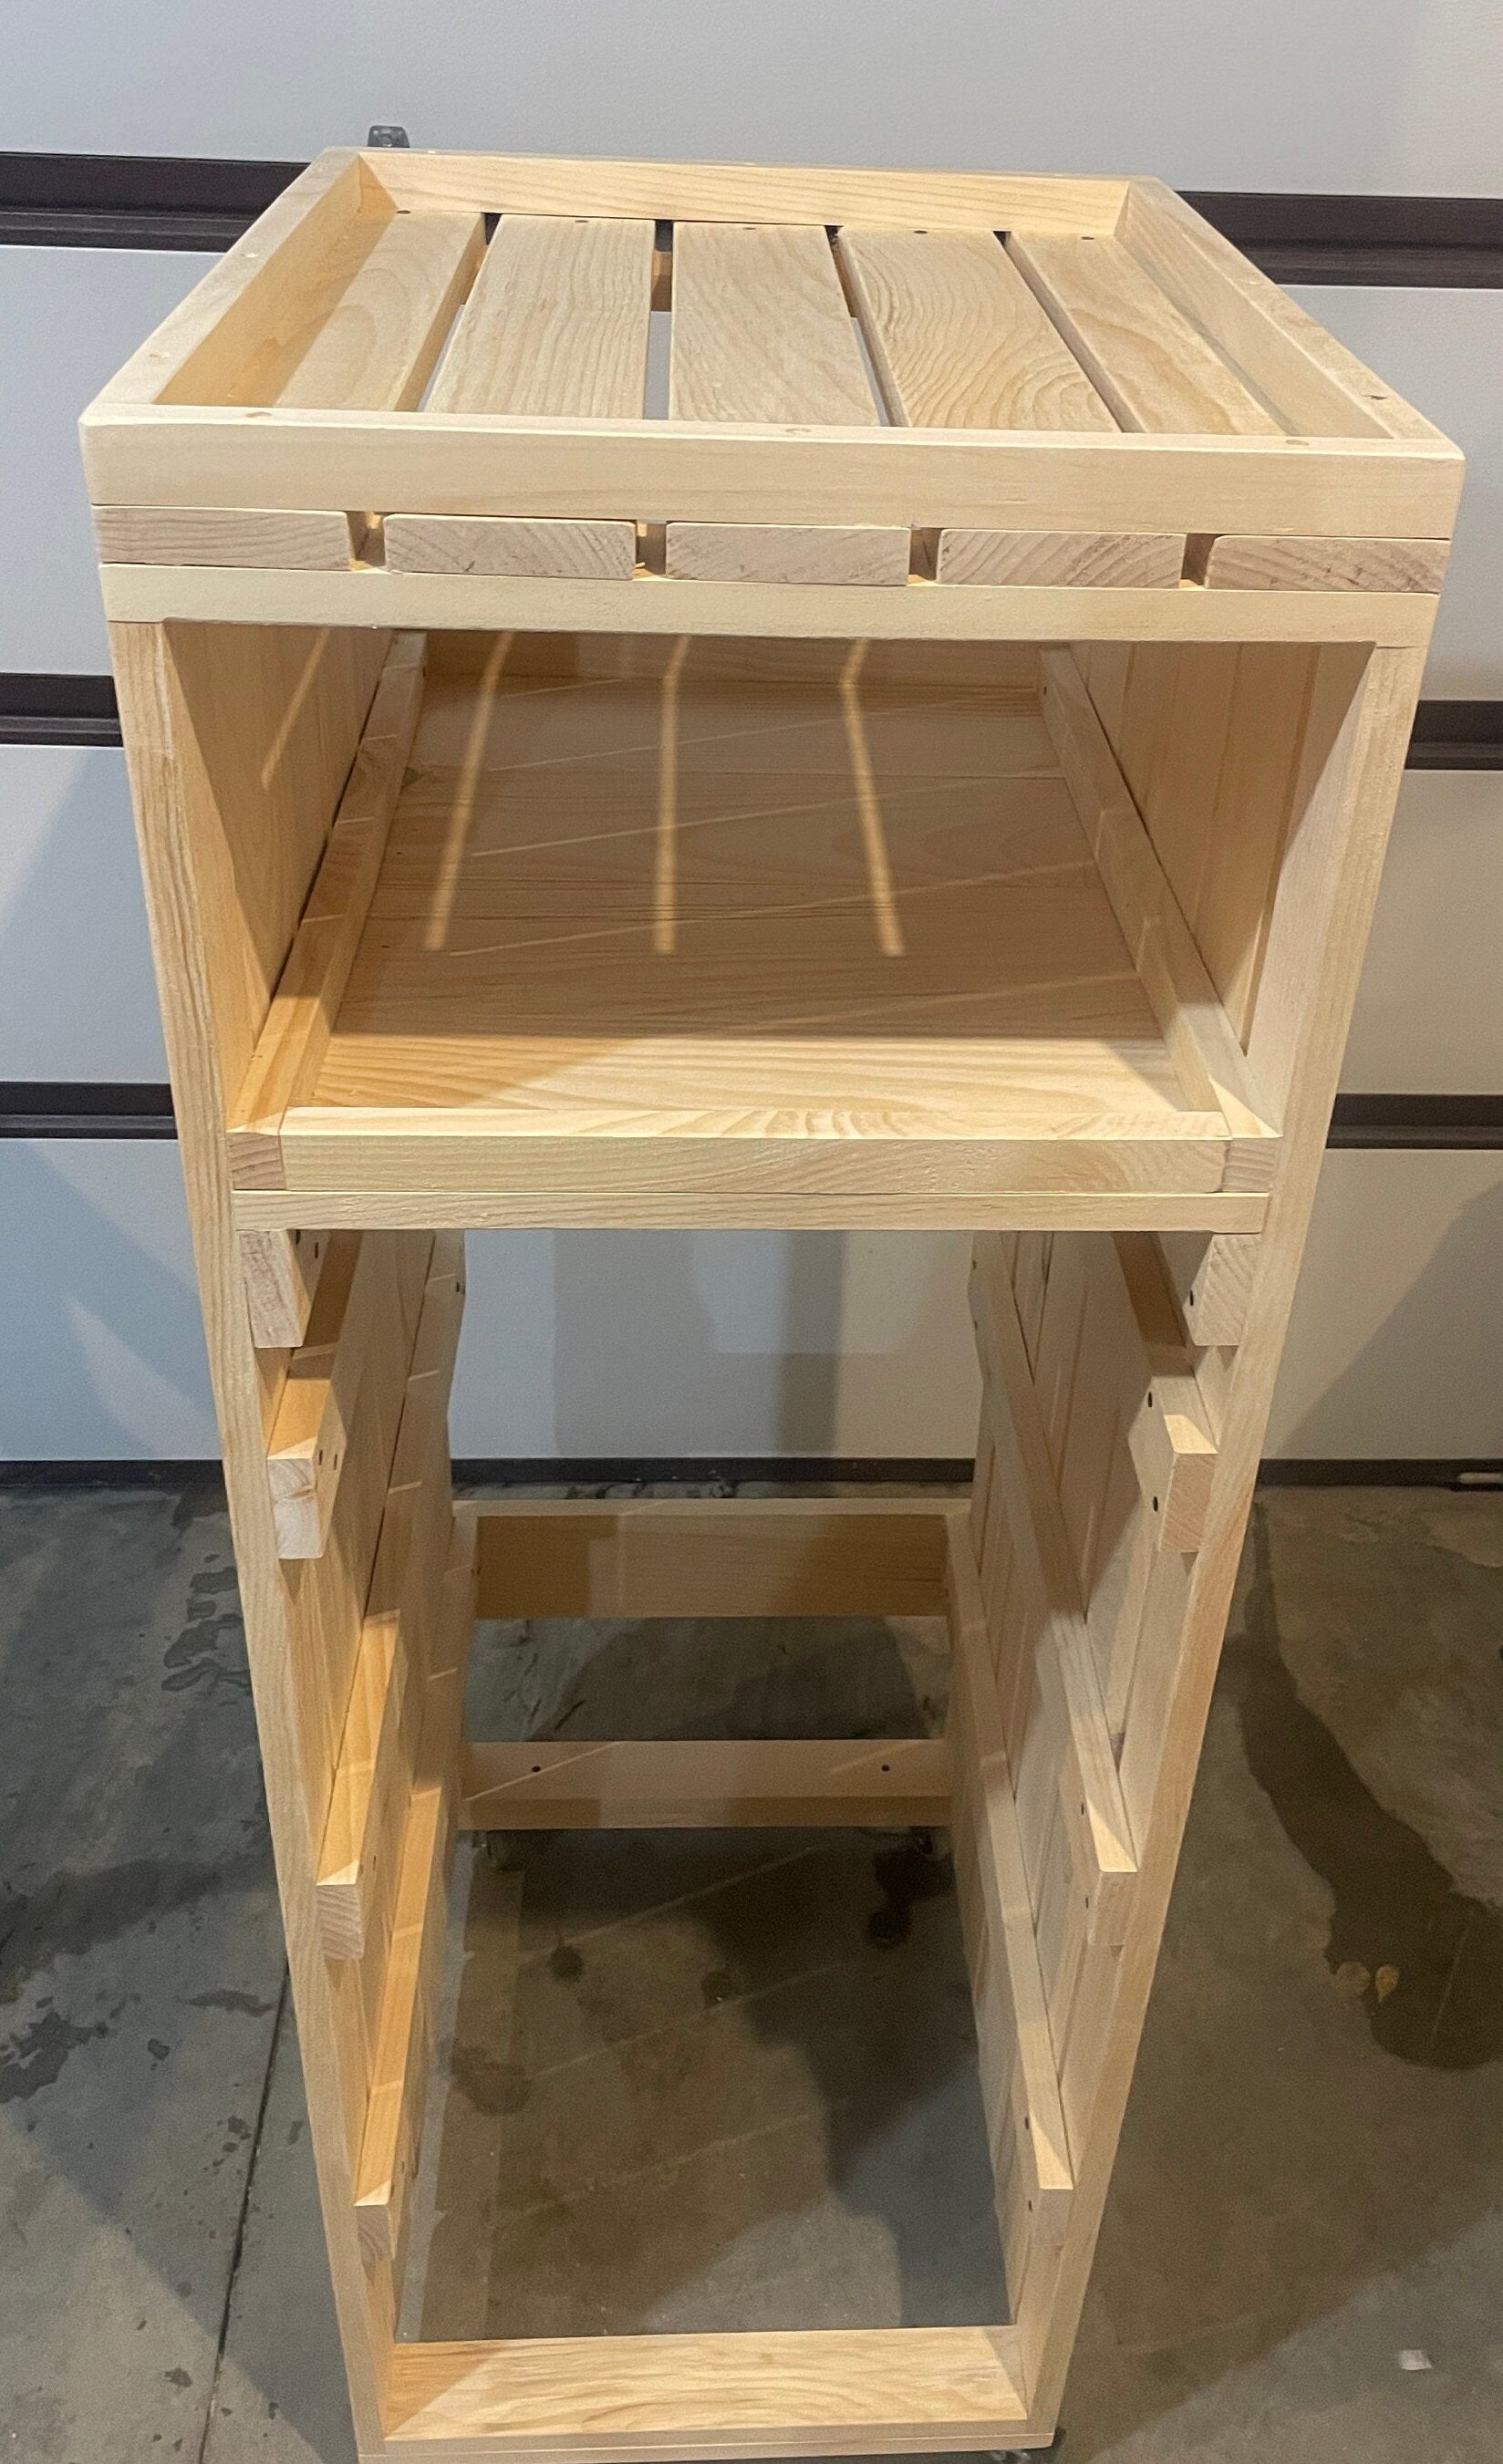 2 Tier Laundry basket holder - TheDustyBlade